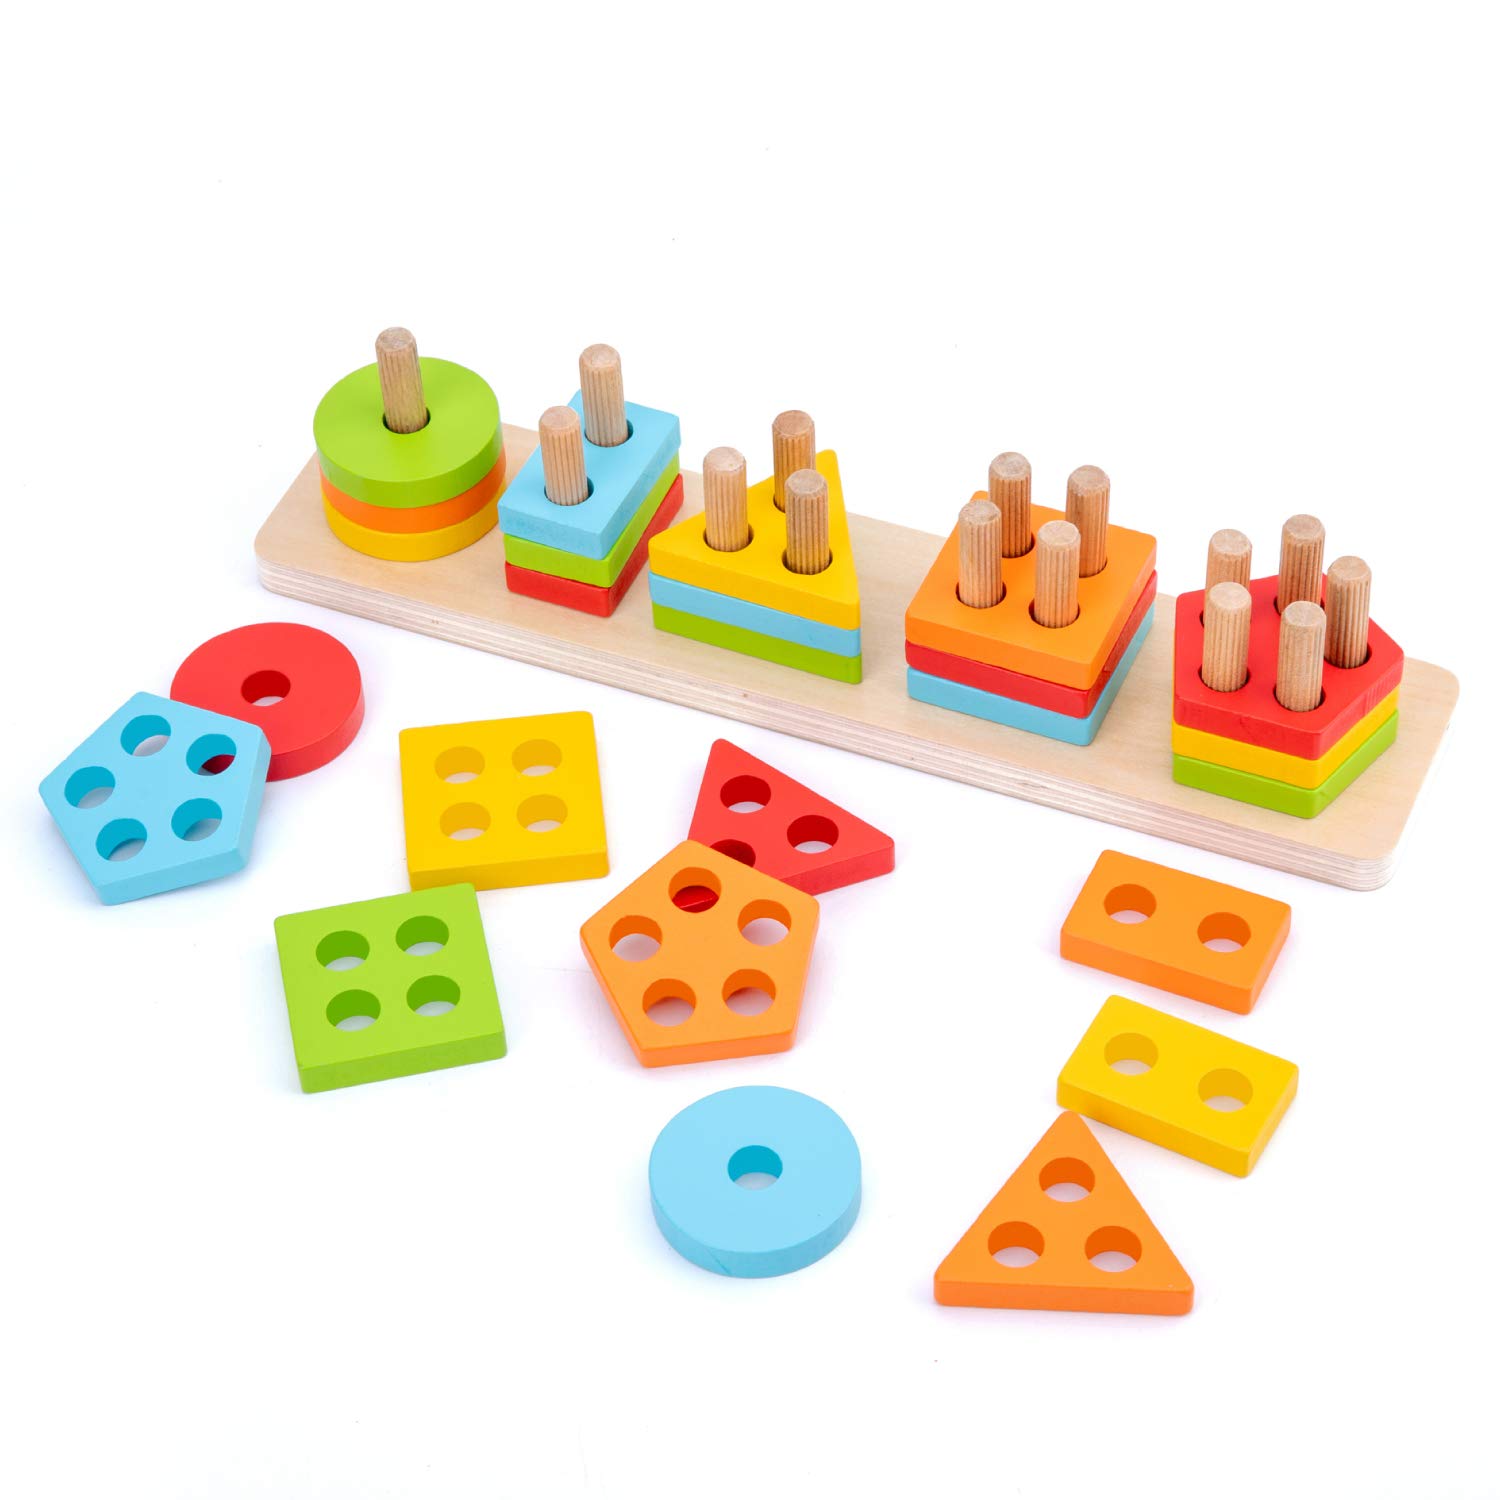 WOOD CITY Wooden Sorting & Stacking Toy